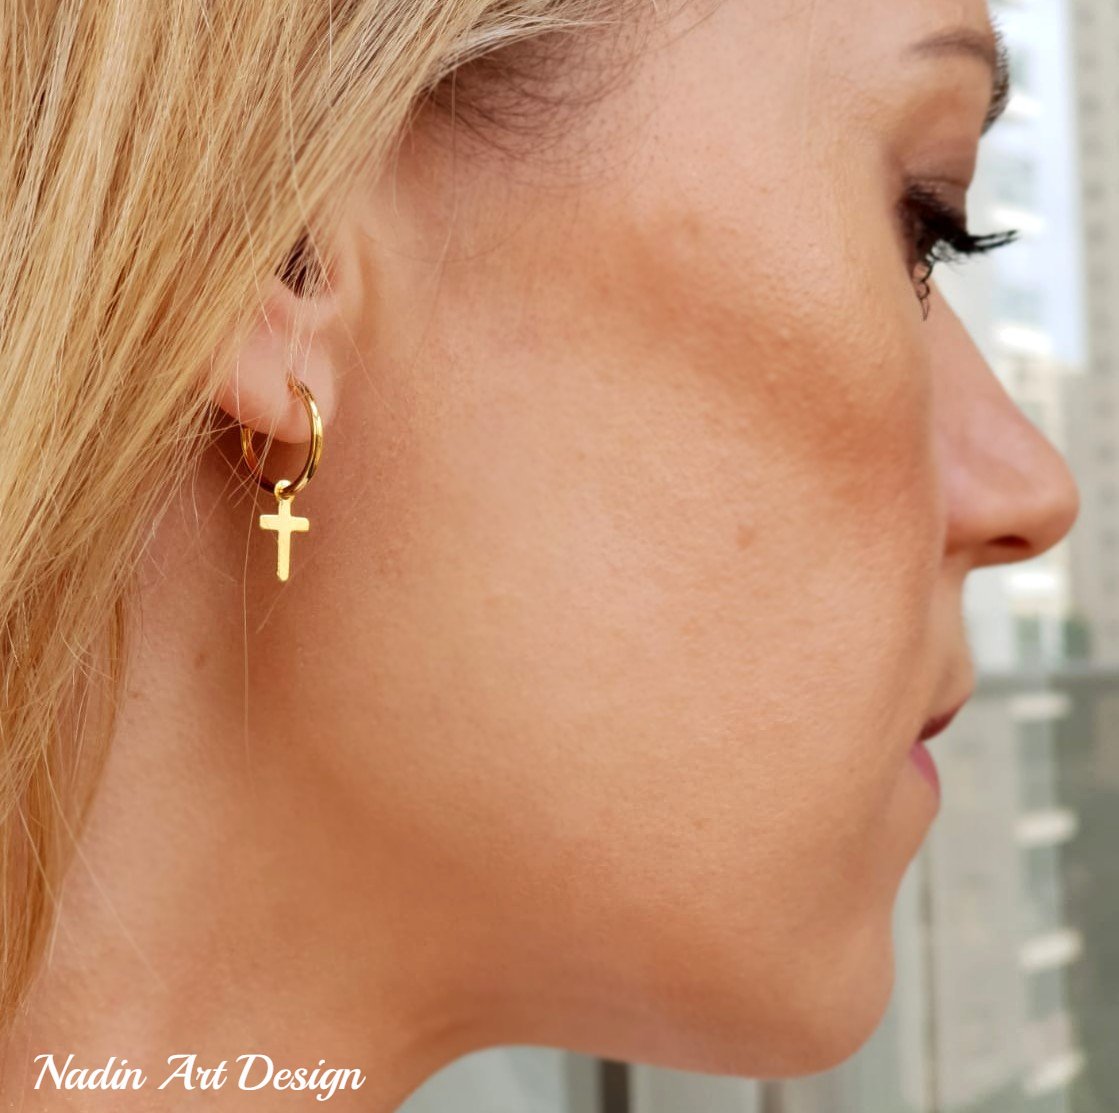 How to Find Best Gold Earring Design for Daily Use?